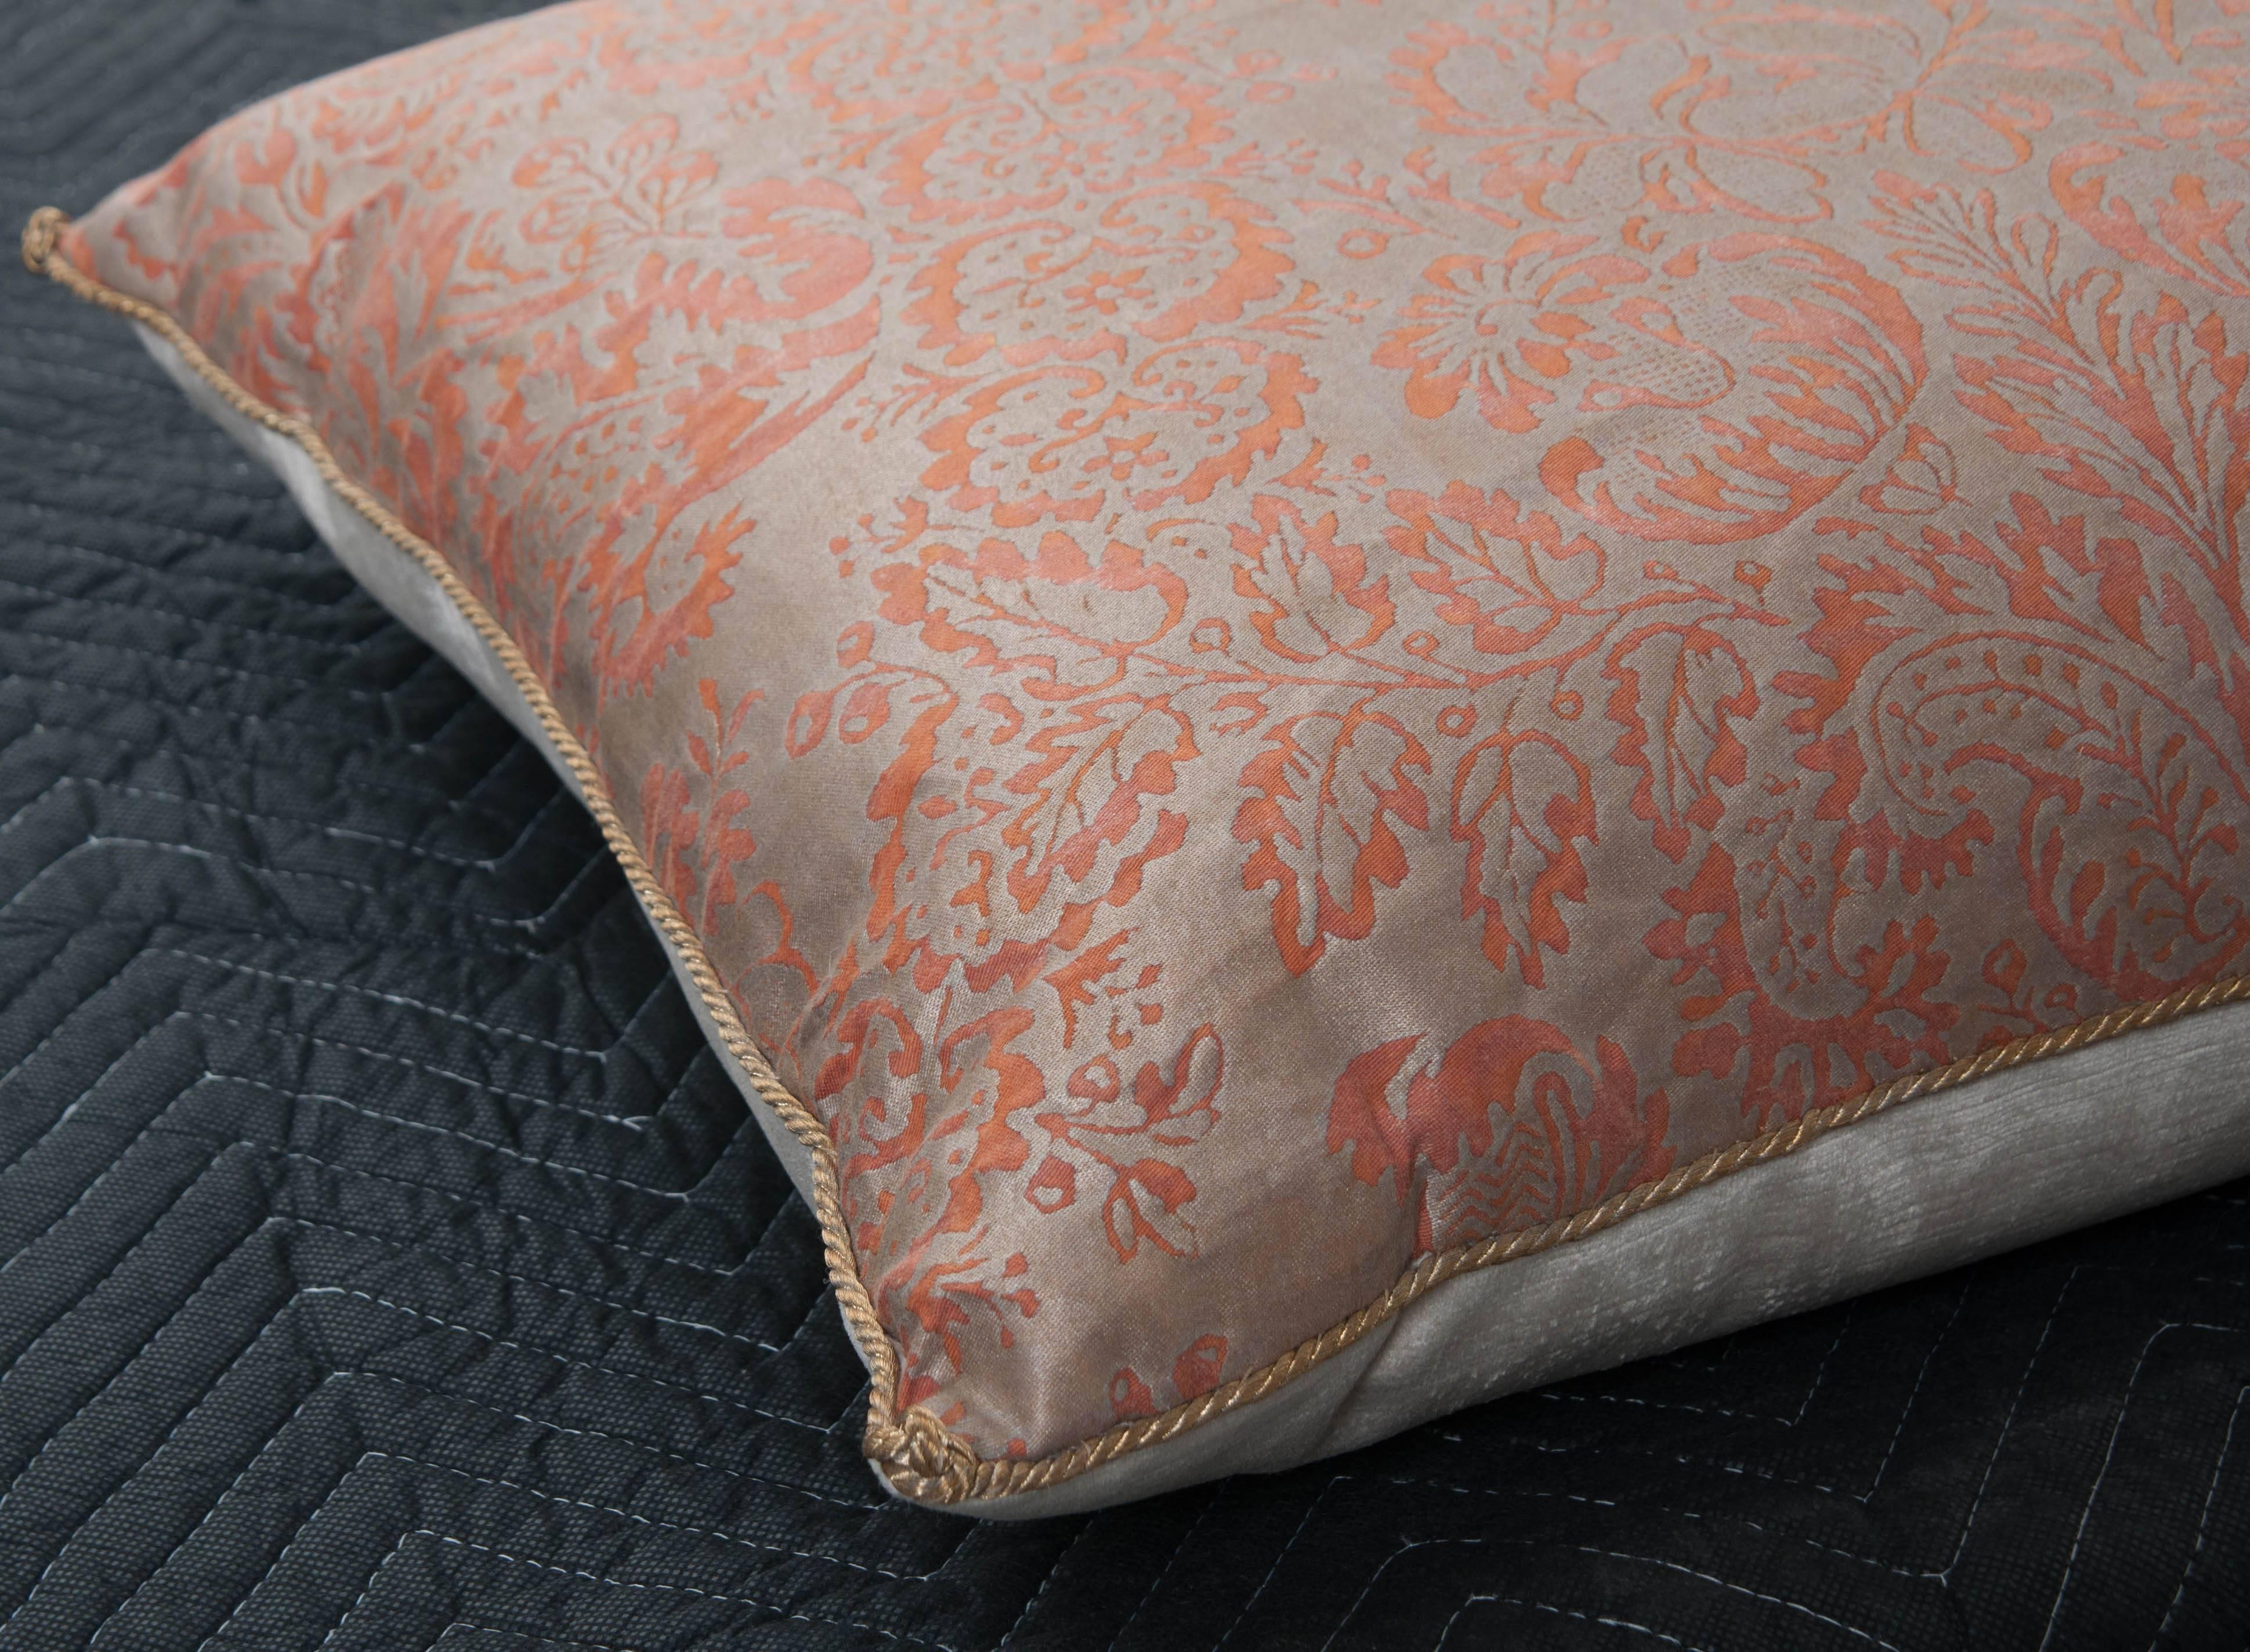 Pair of Antique Fortuny Pillow by B. Viz Designs In Excellent Condition For Sale In Baton Rouge, LA